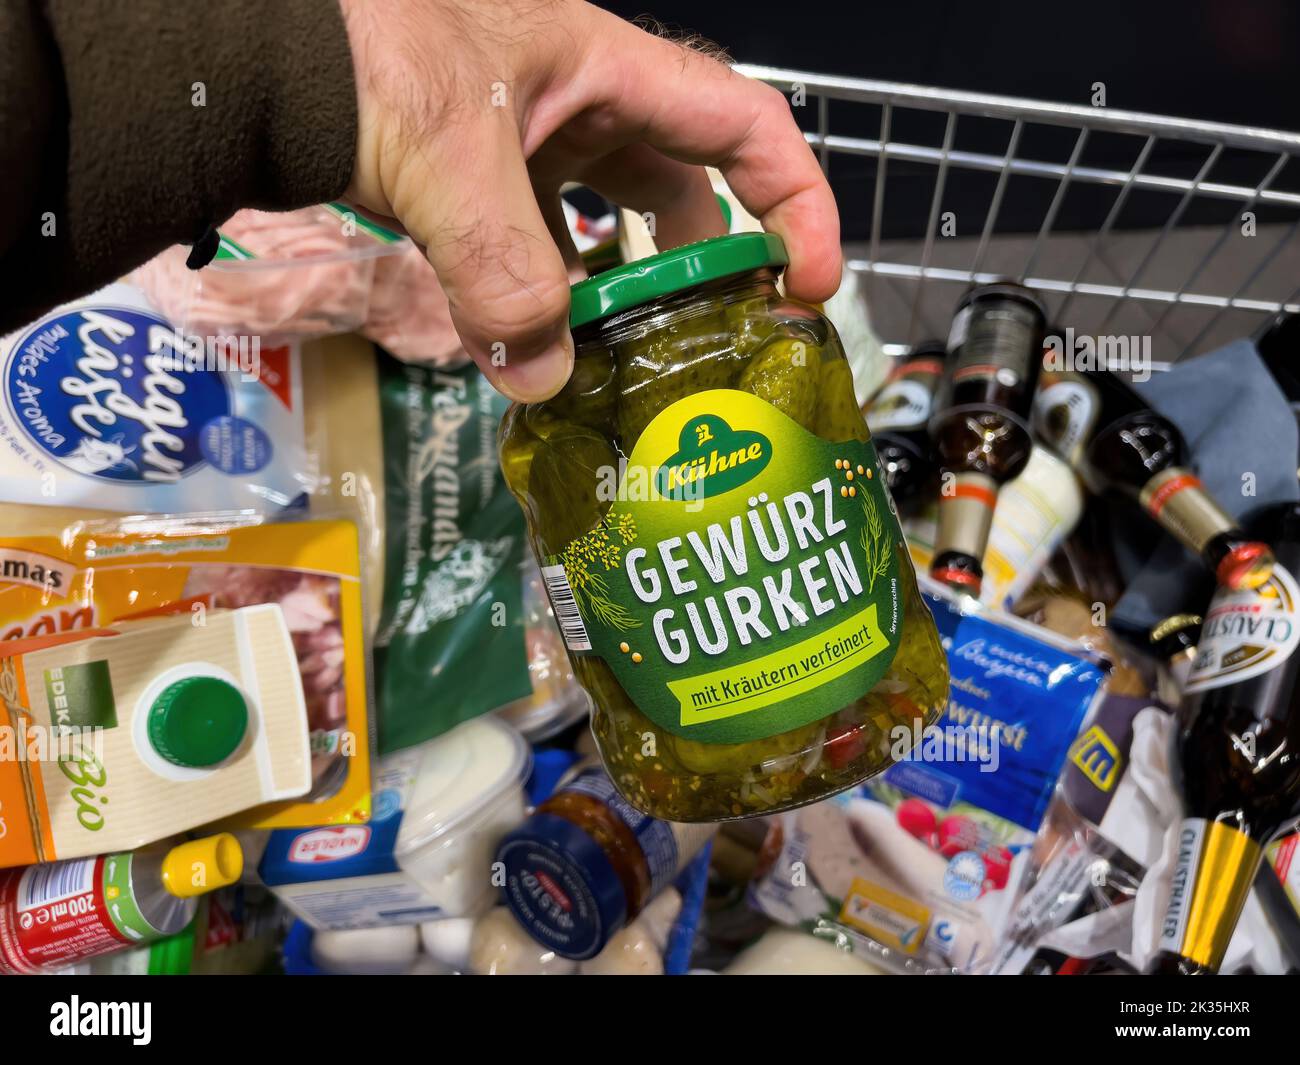 Frankfurt, Germany - Sep 17, 2022: POV male hand with a full shopping cart of groceries at a convenience store holding Kuhne Gewurz gurken - pickled gherkin Stock Photo